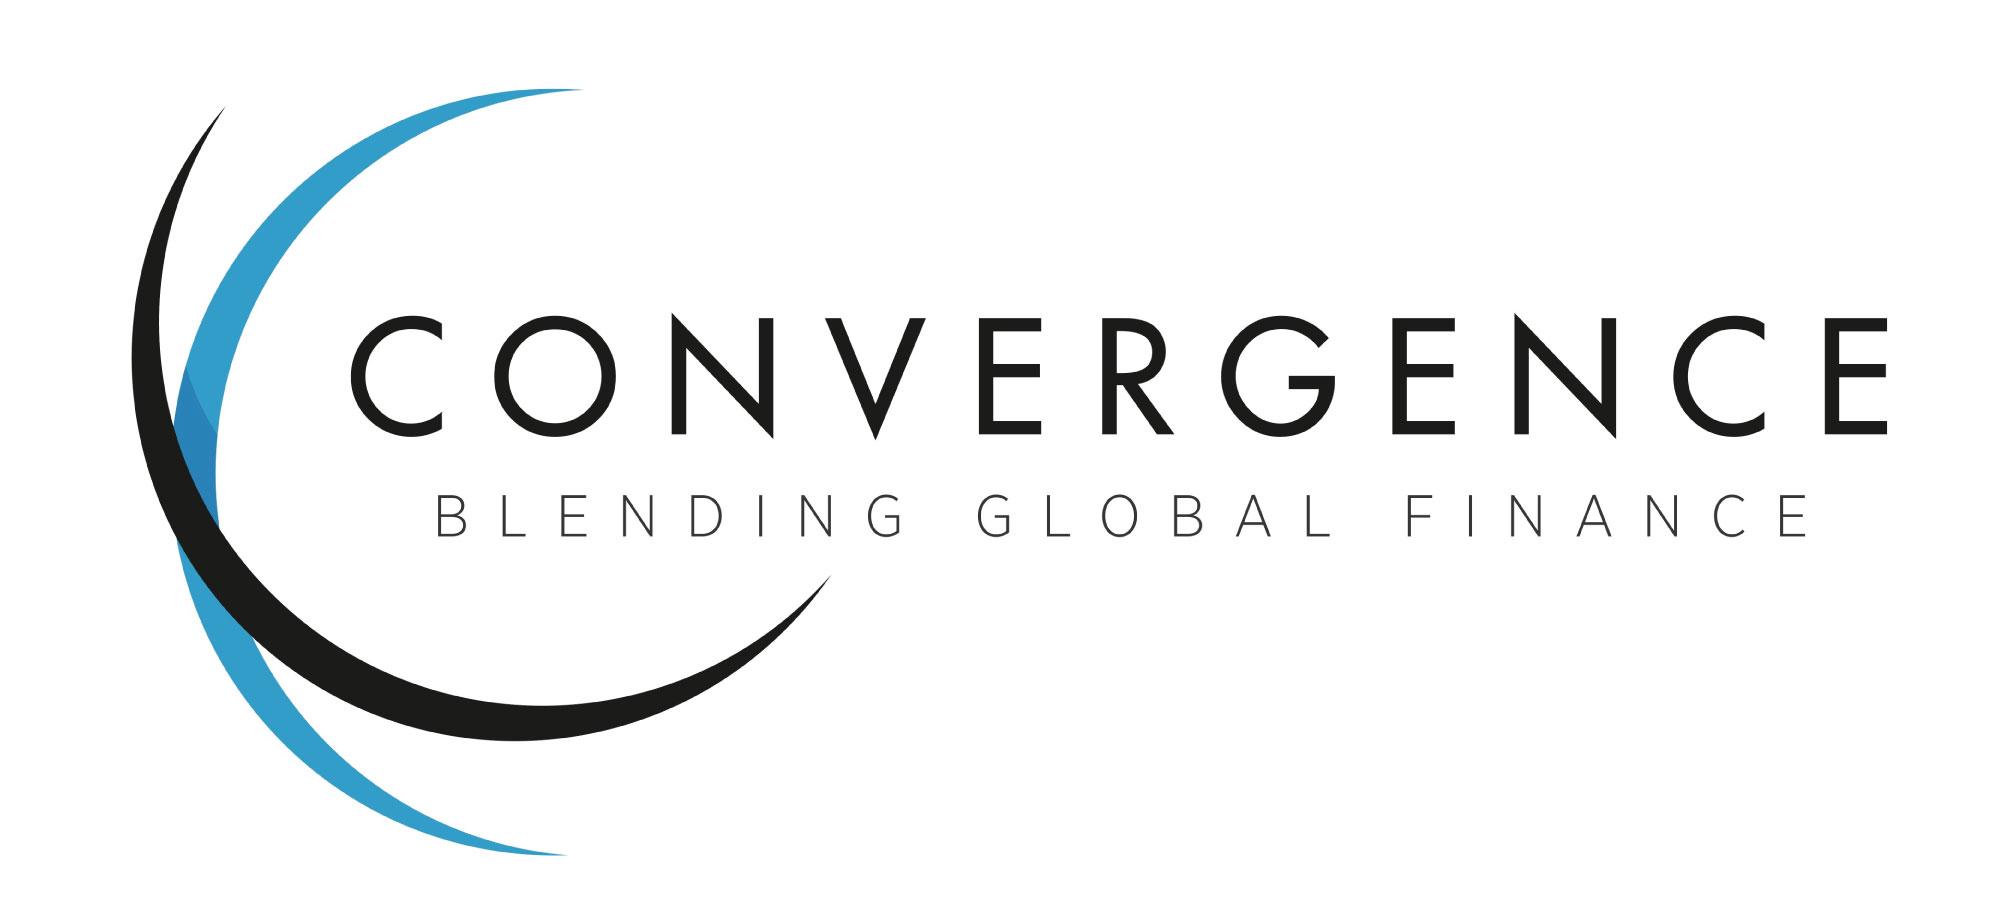 Convergence design grant to support rural energy access and gender inclusivity in Nigeria